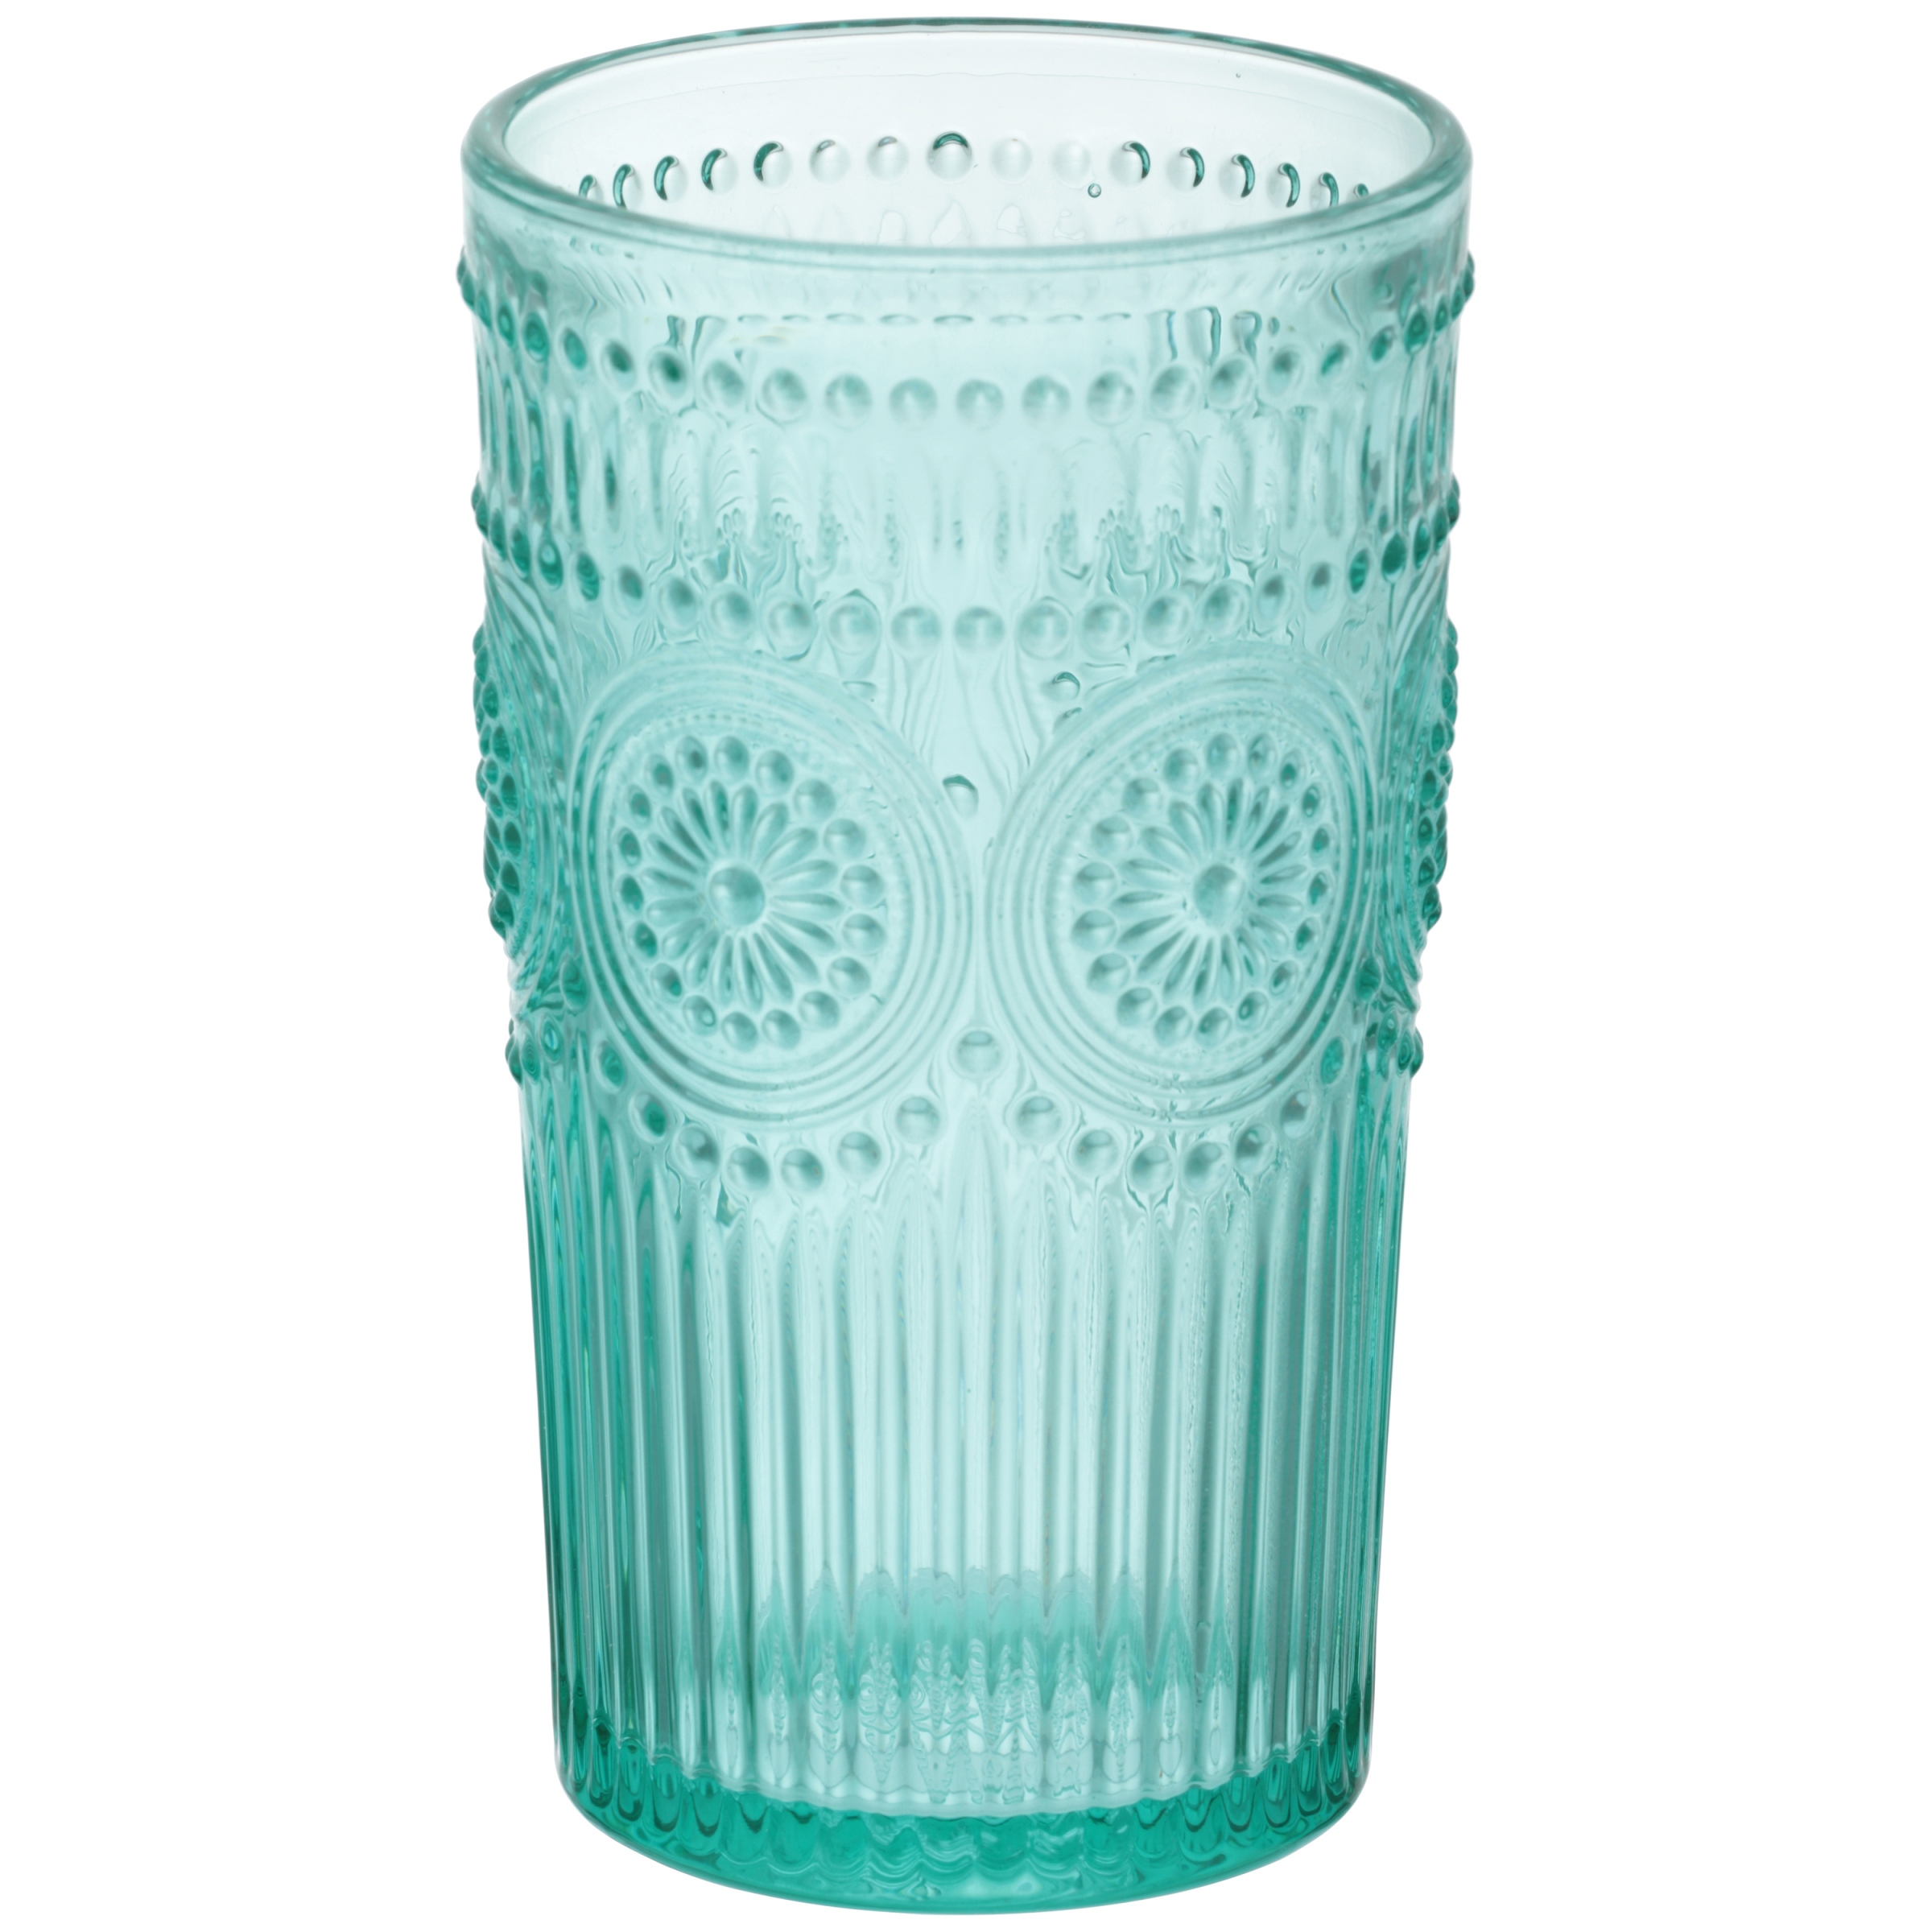 The Pioneer Woman Adeline 16-Ounce Teal Emboss Glass Tumblers, Set of 4 - image 4 of 5